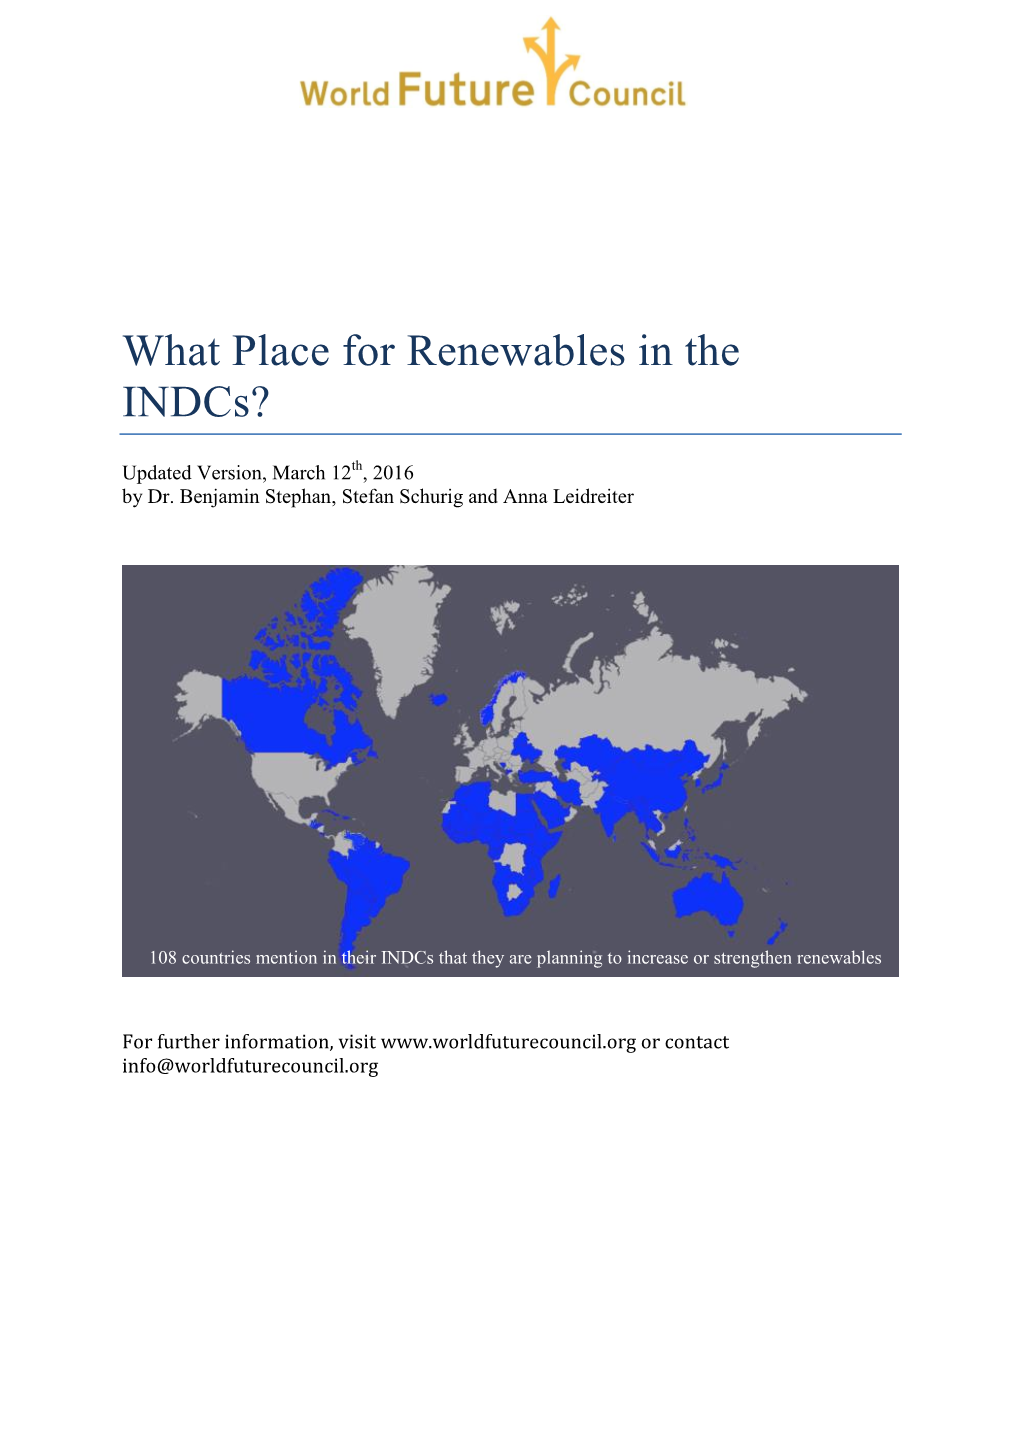 What Place for Renewables in the Indcs?